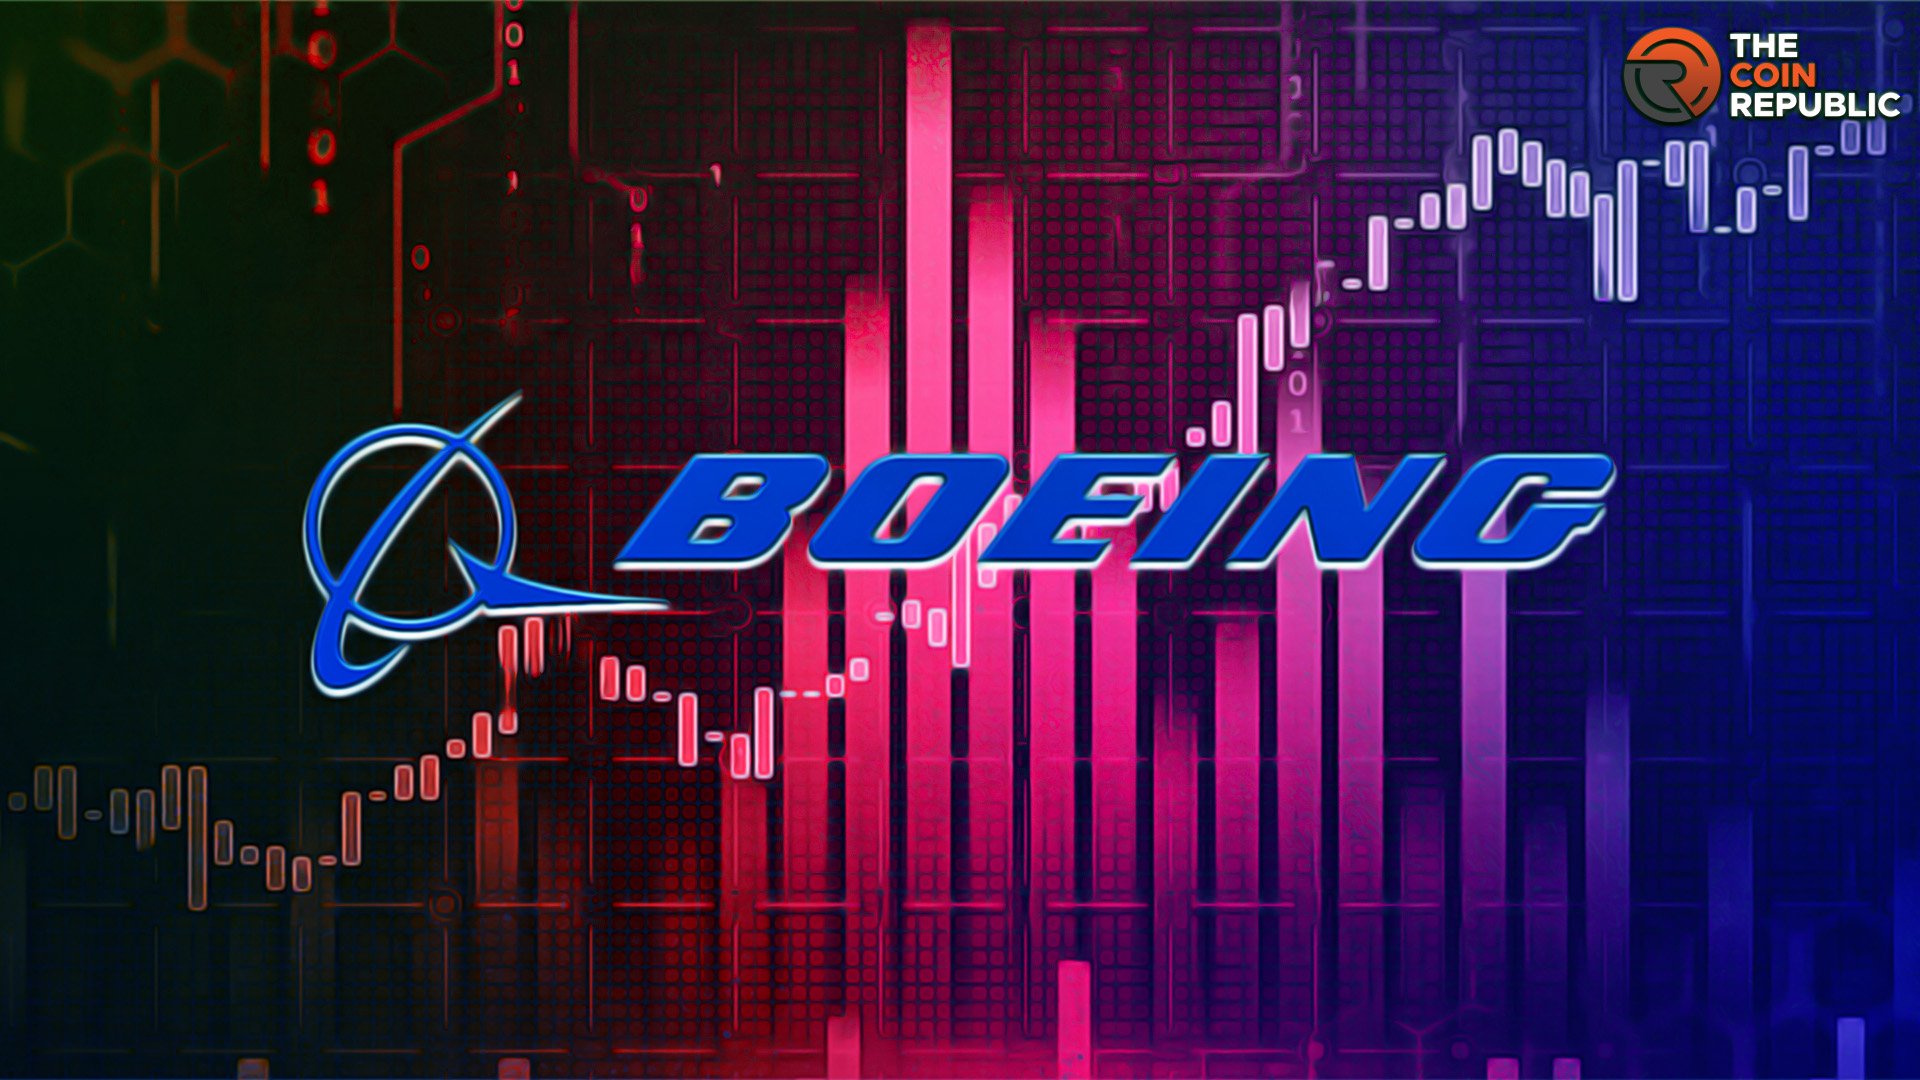 The Boeing Co. (BA Stock) To Report Earnings Next Week